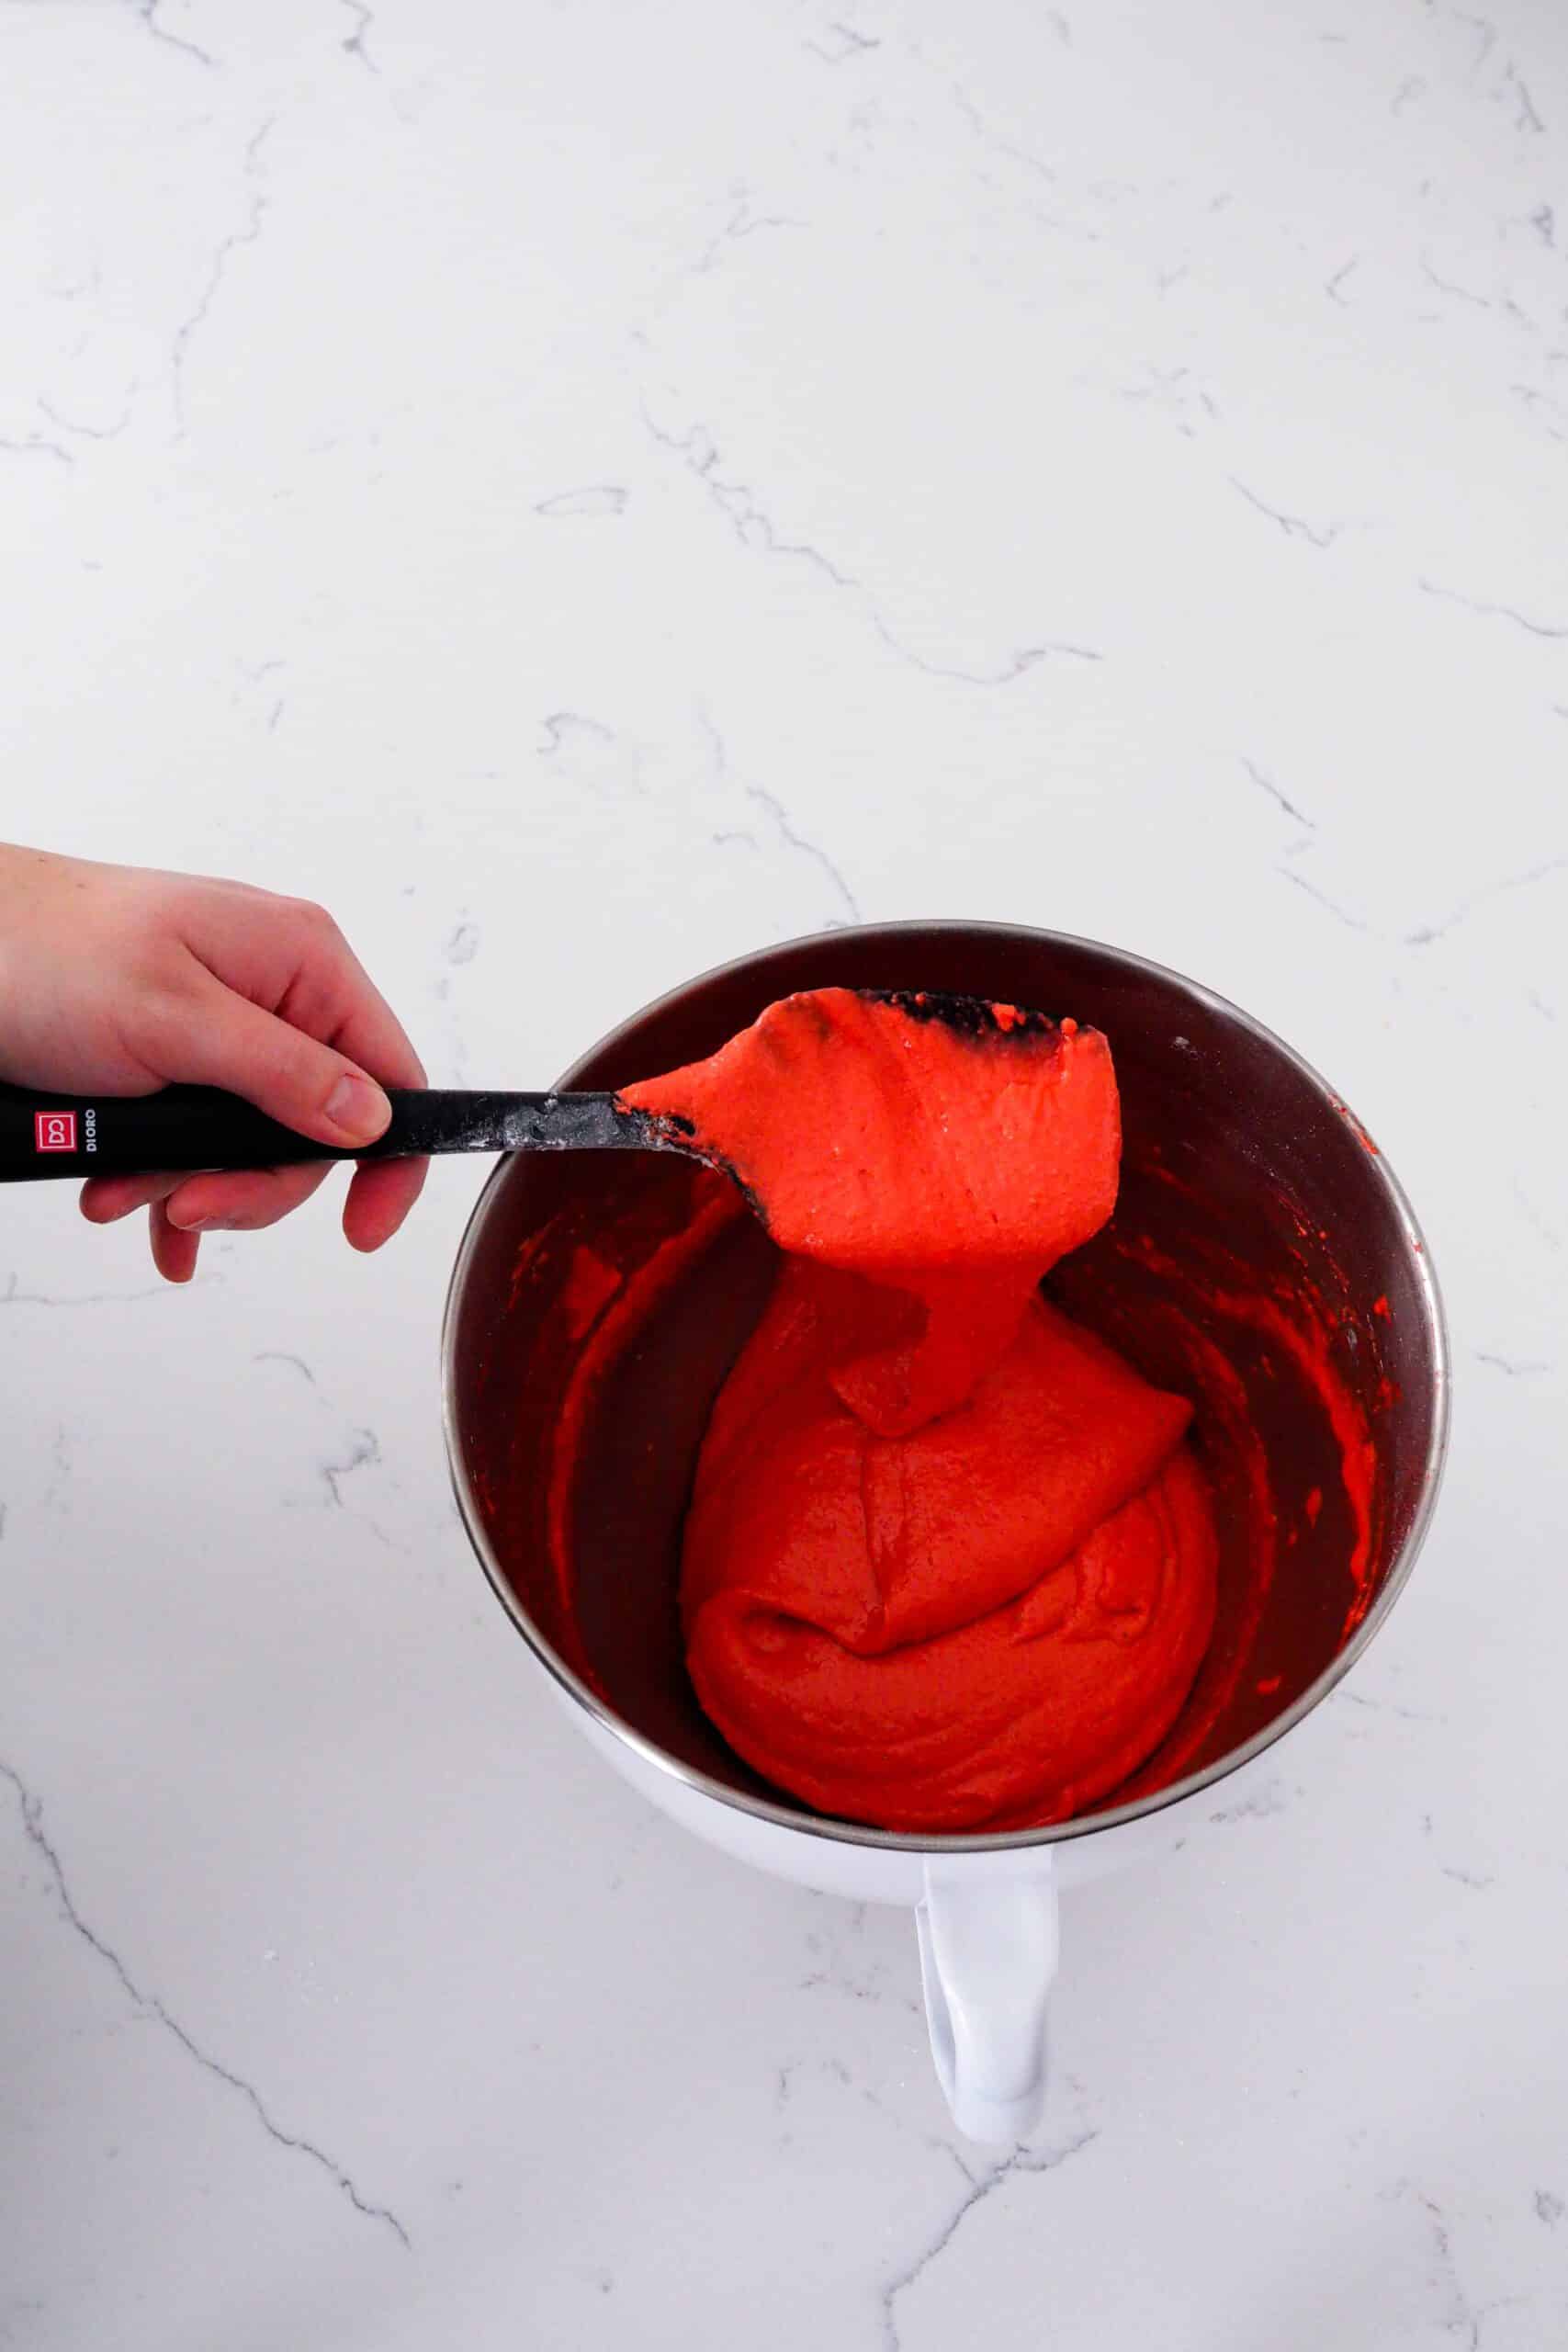 Macaron batter flows off a spatula in a long ribbon.